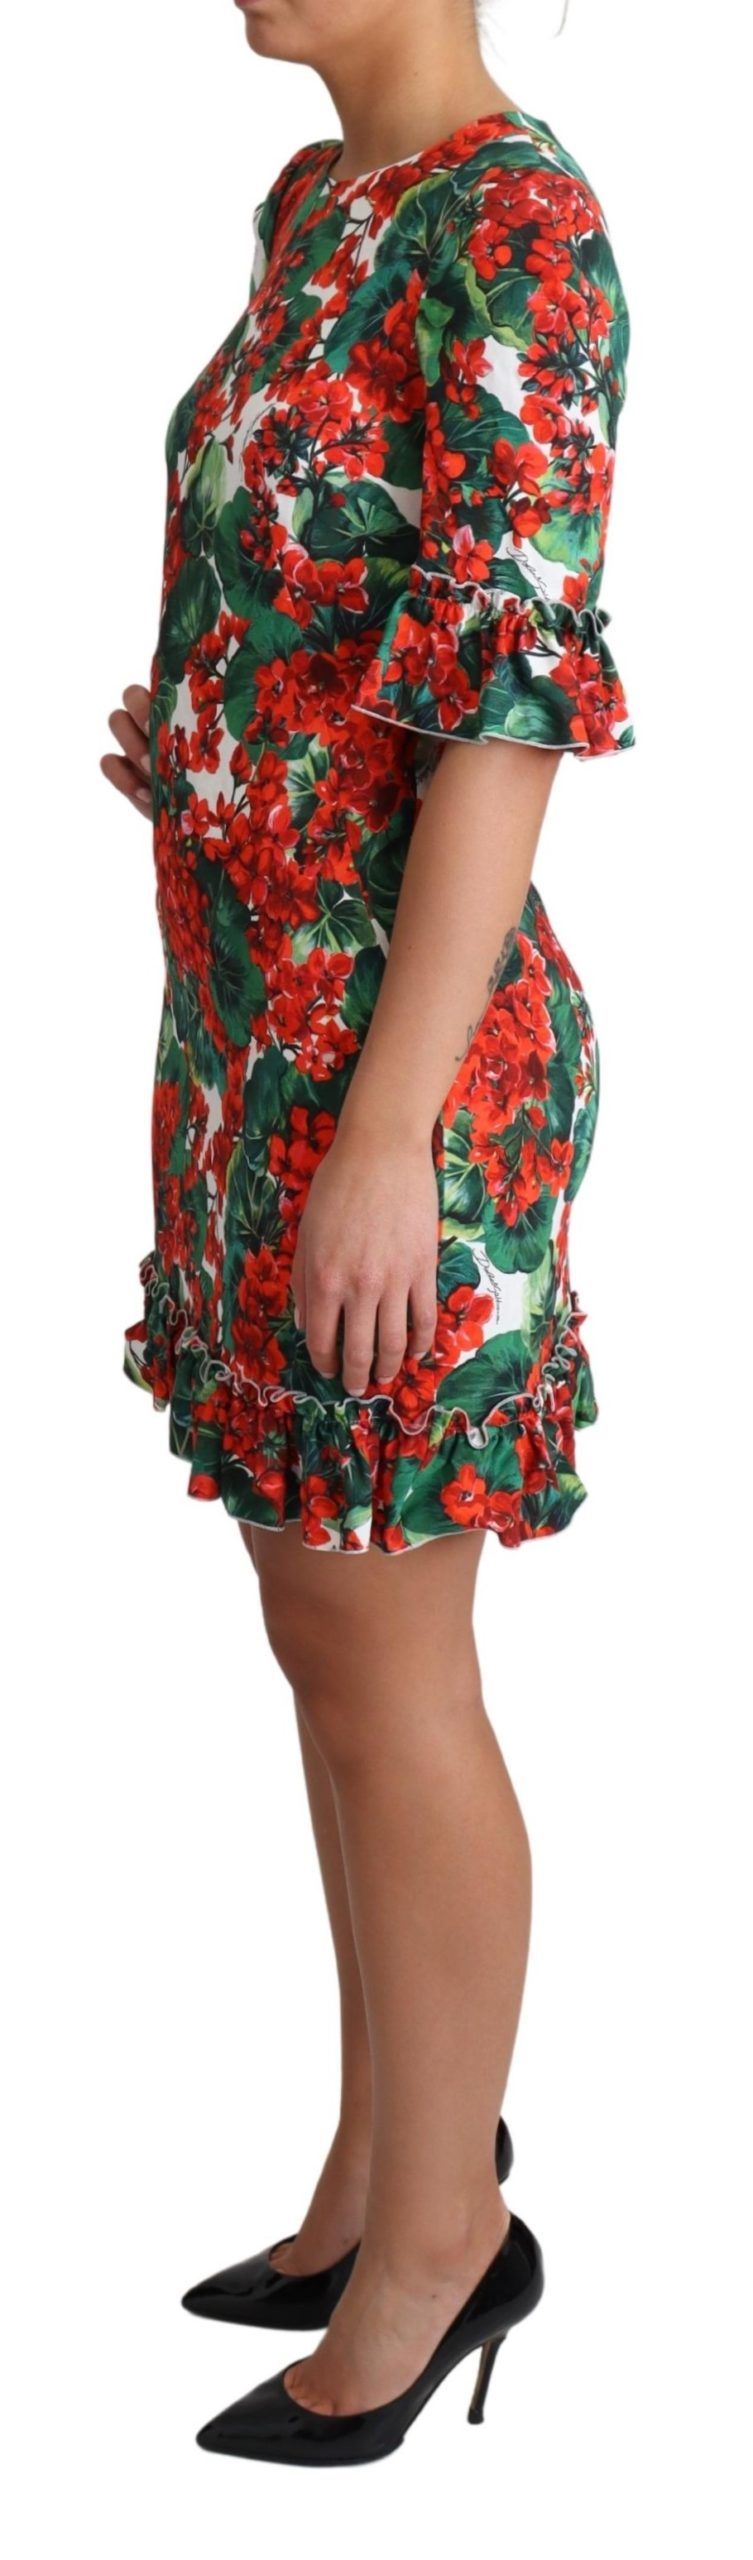 Elegant Floral Ruffle Dress with Stretch Lining